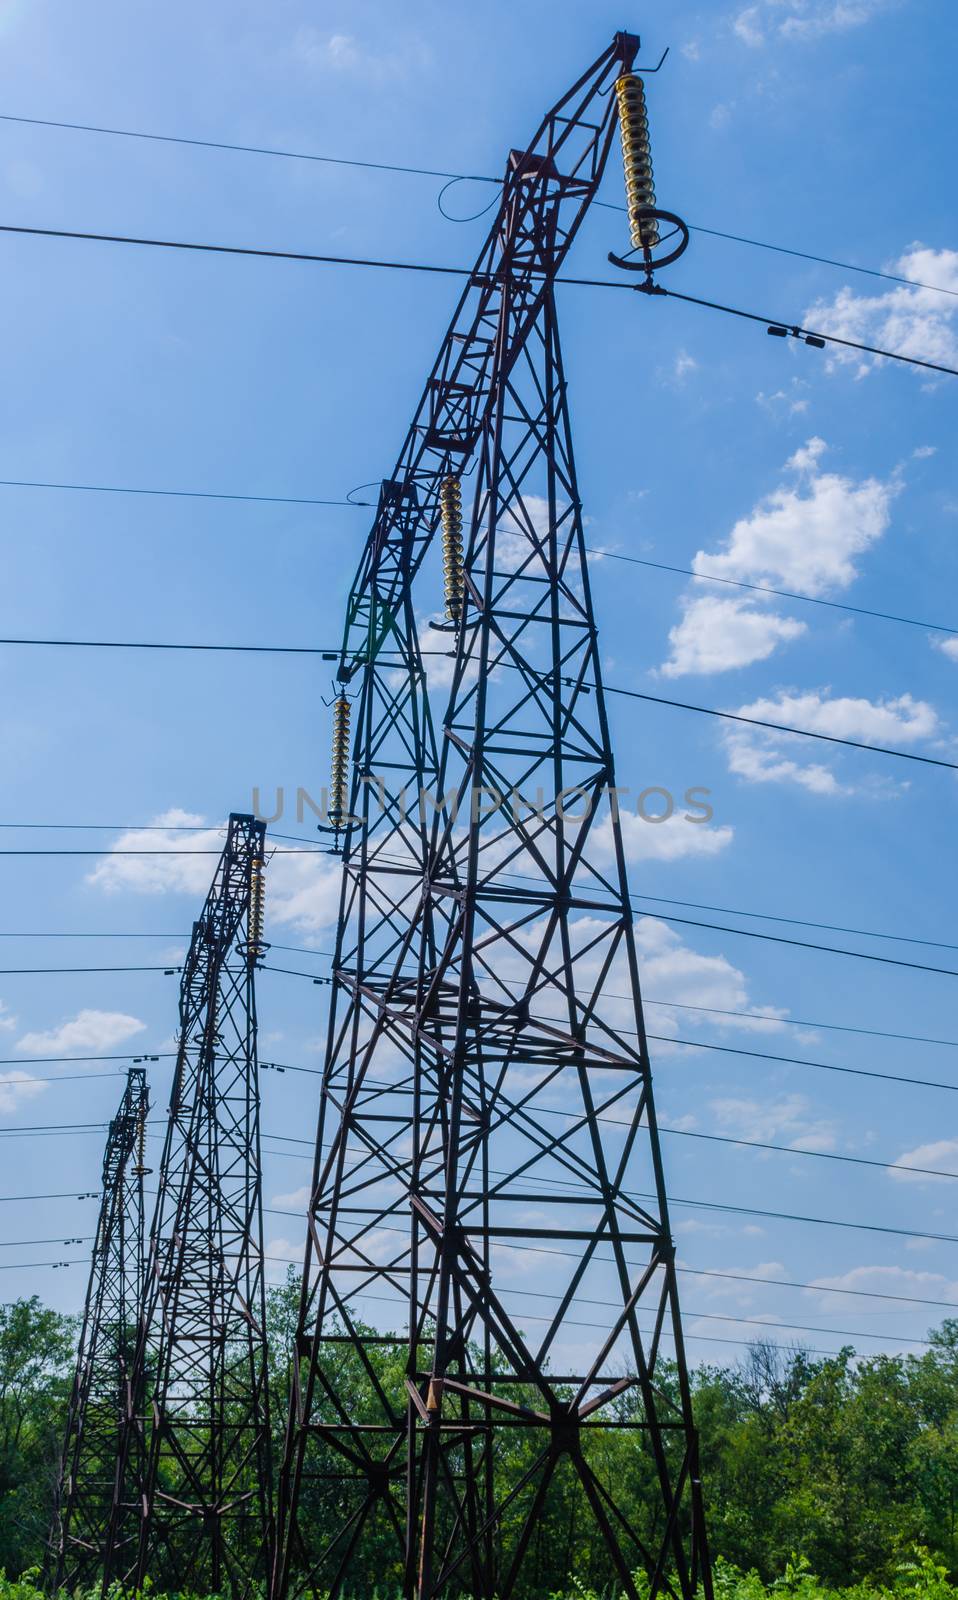 v supports of high-voltage power lines against the blue sky